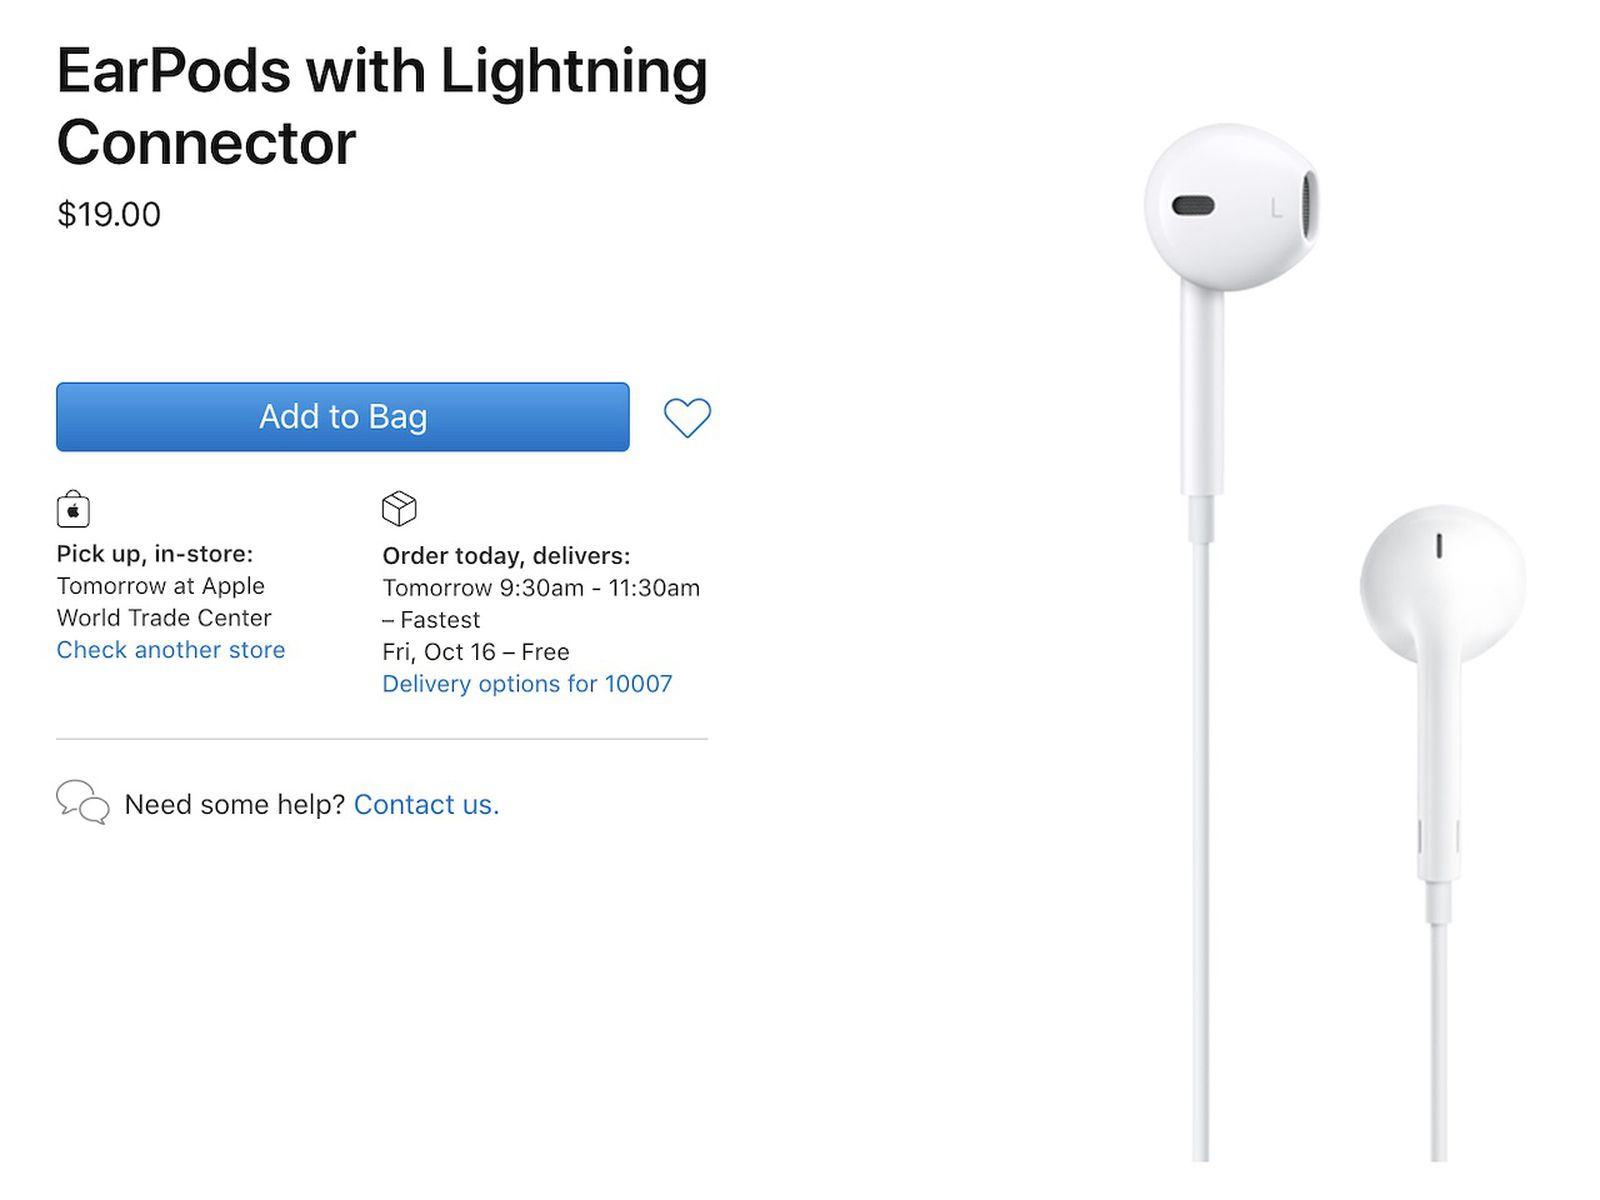 Apple Lowers Price of EarPods by $10 Now That They Aren't Included With  iPhones - MacRumors